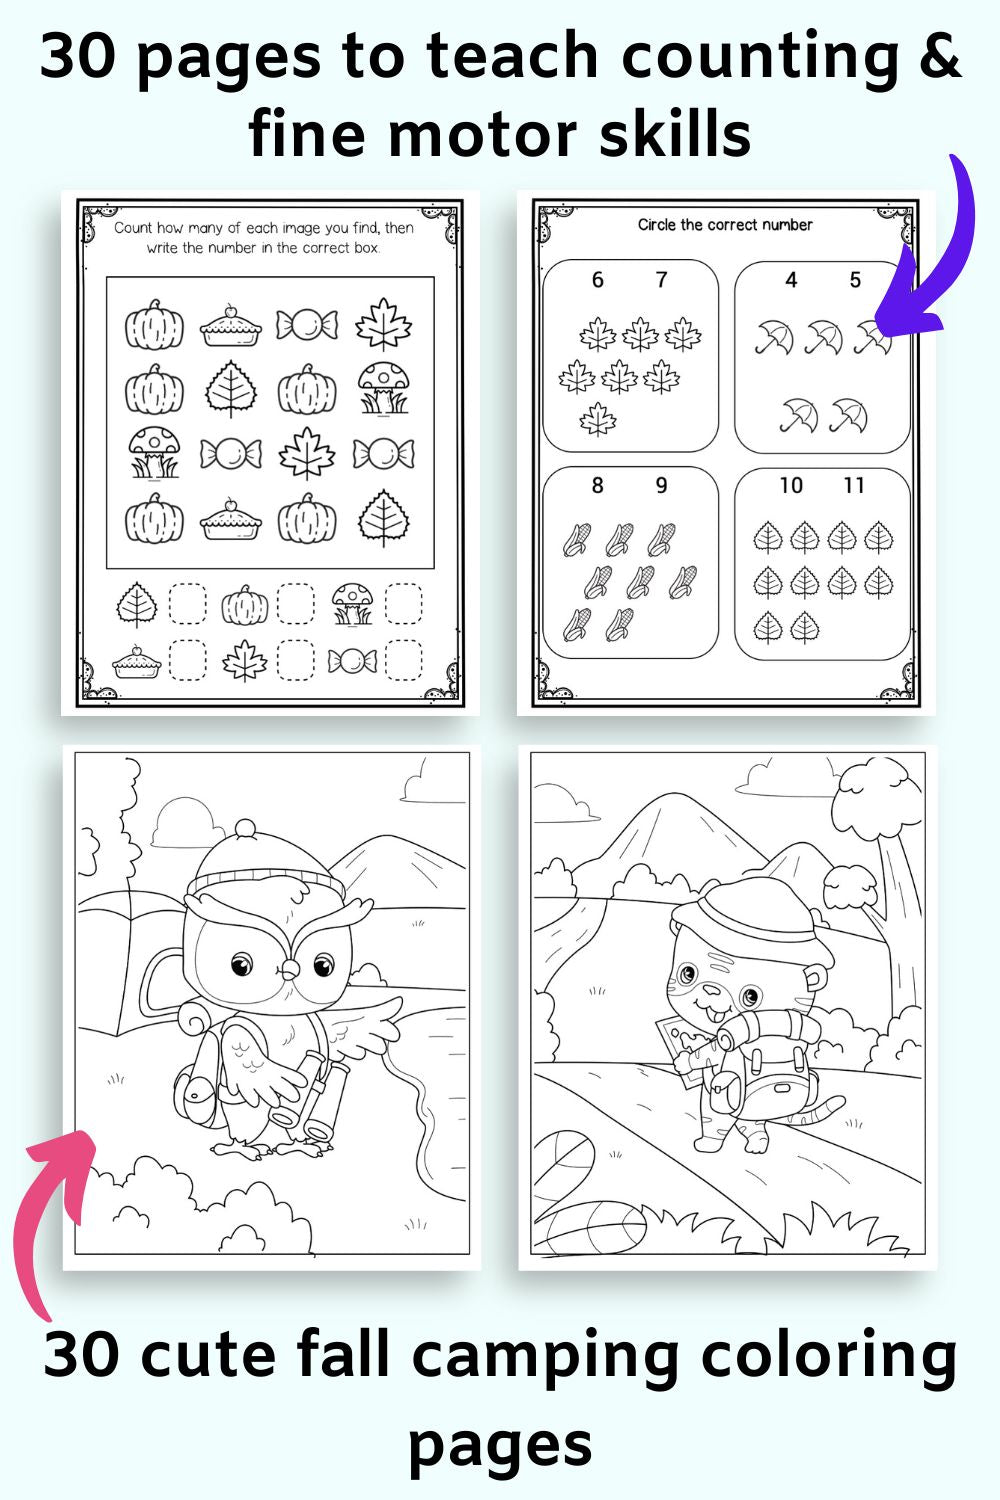 Text "30 pages to teach counting and fine motor skills" and "30 cute fall camping coloring pages"